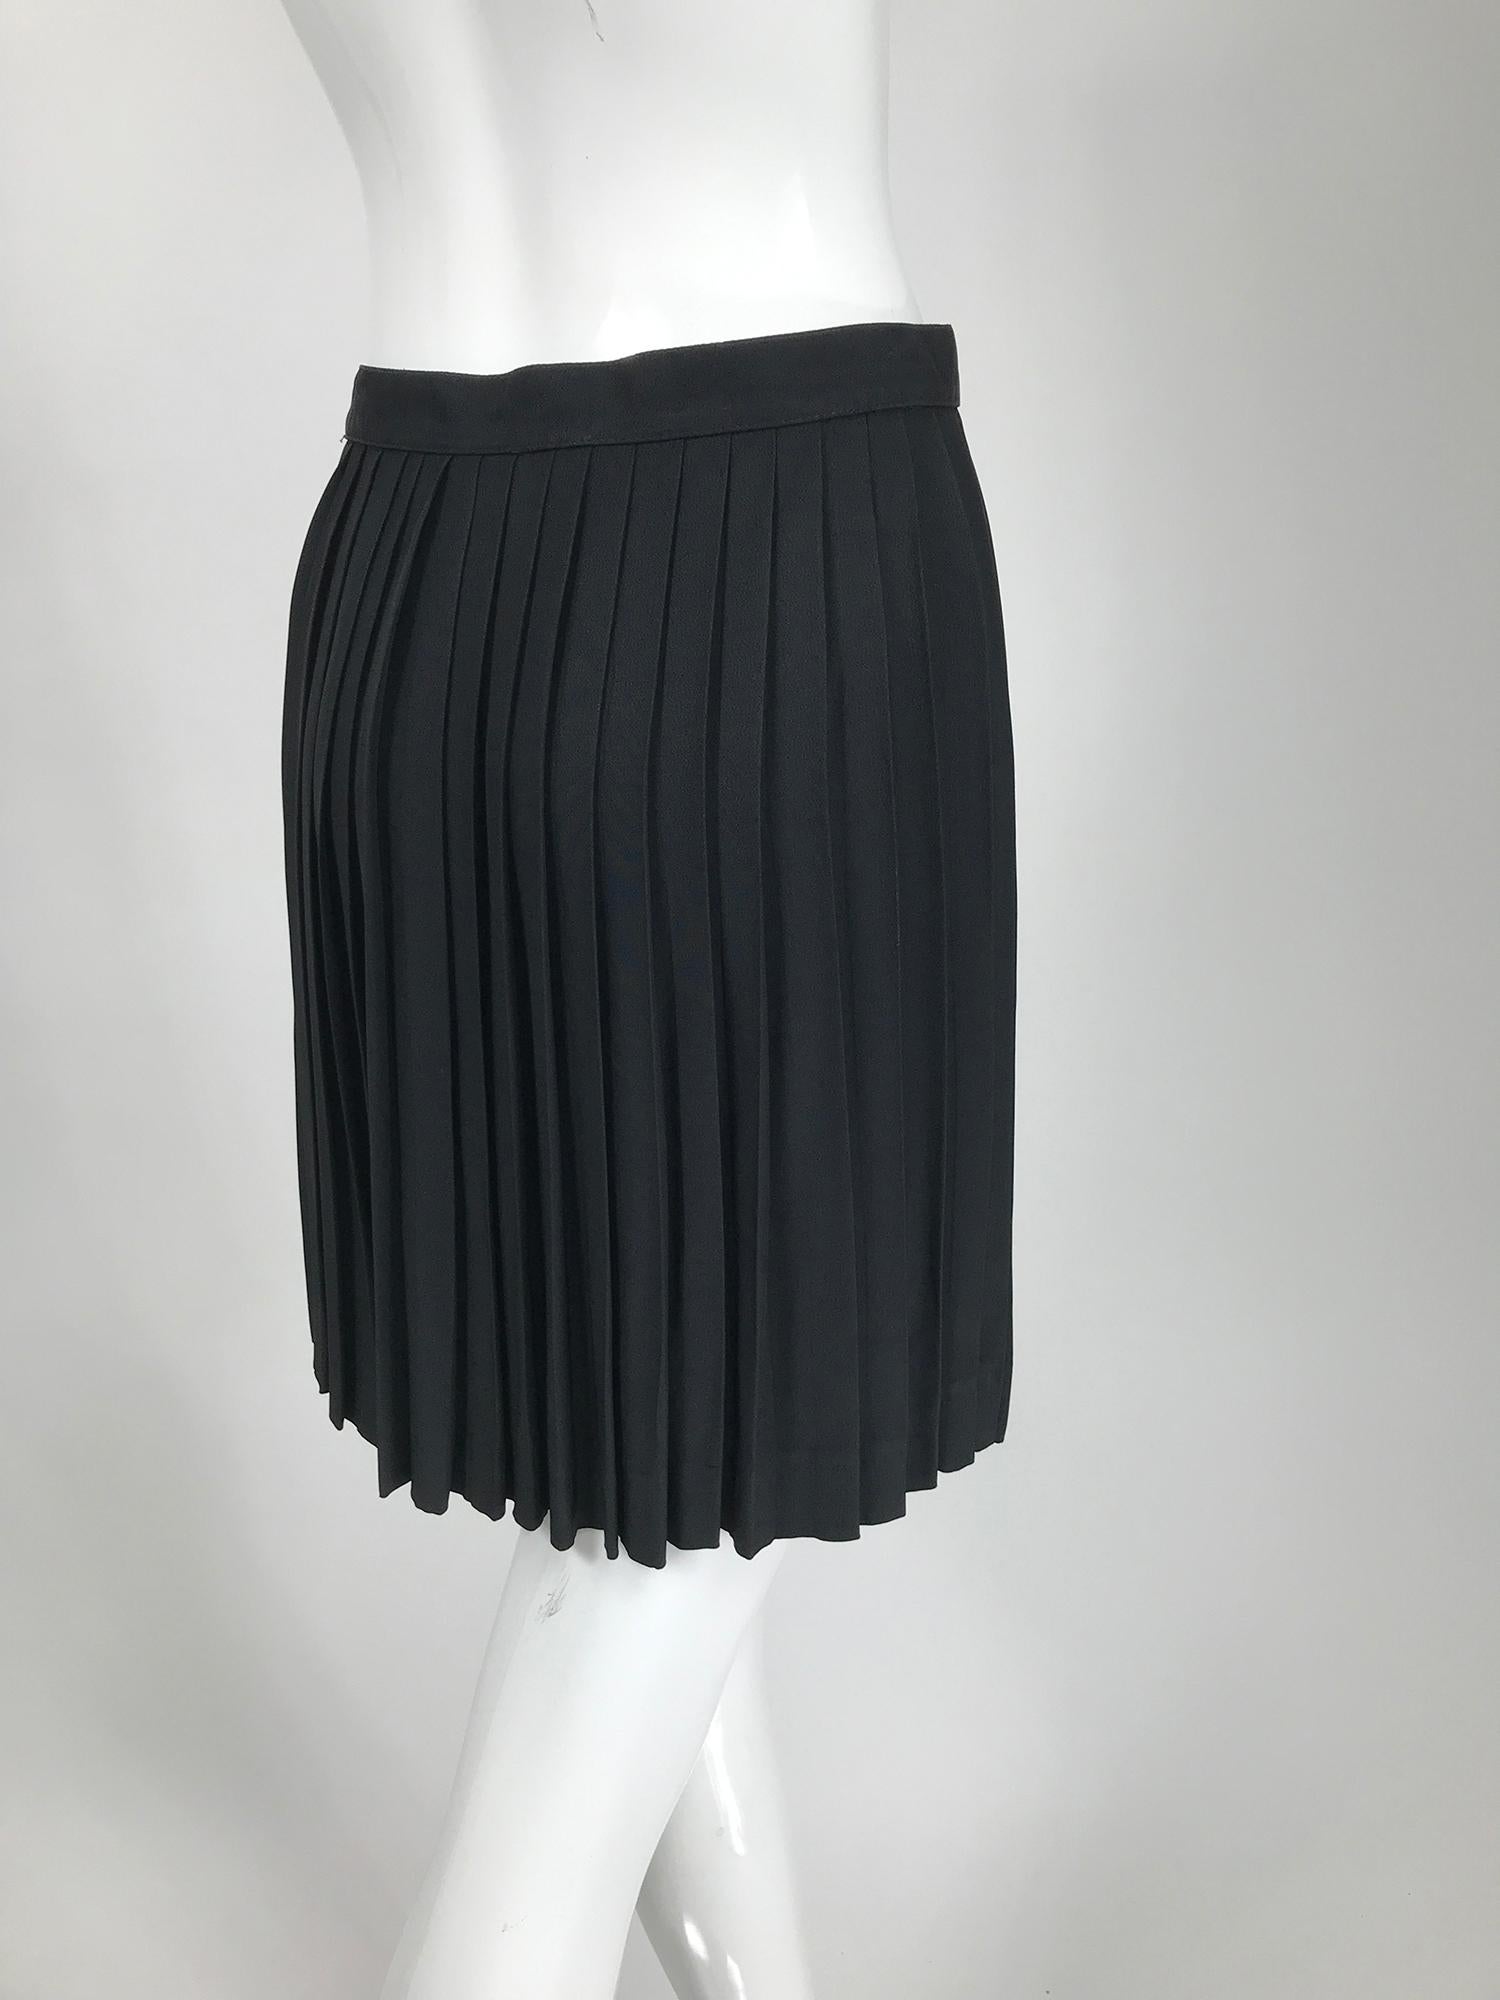 Thierry Mugler Black Crepe Side Snap Pleated Mini Skirt 1980s In Good Condition For Sale In West Palm Beach, FL